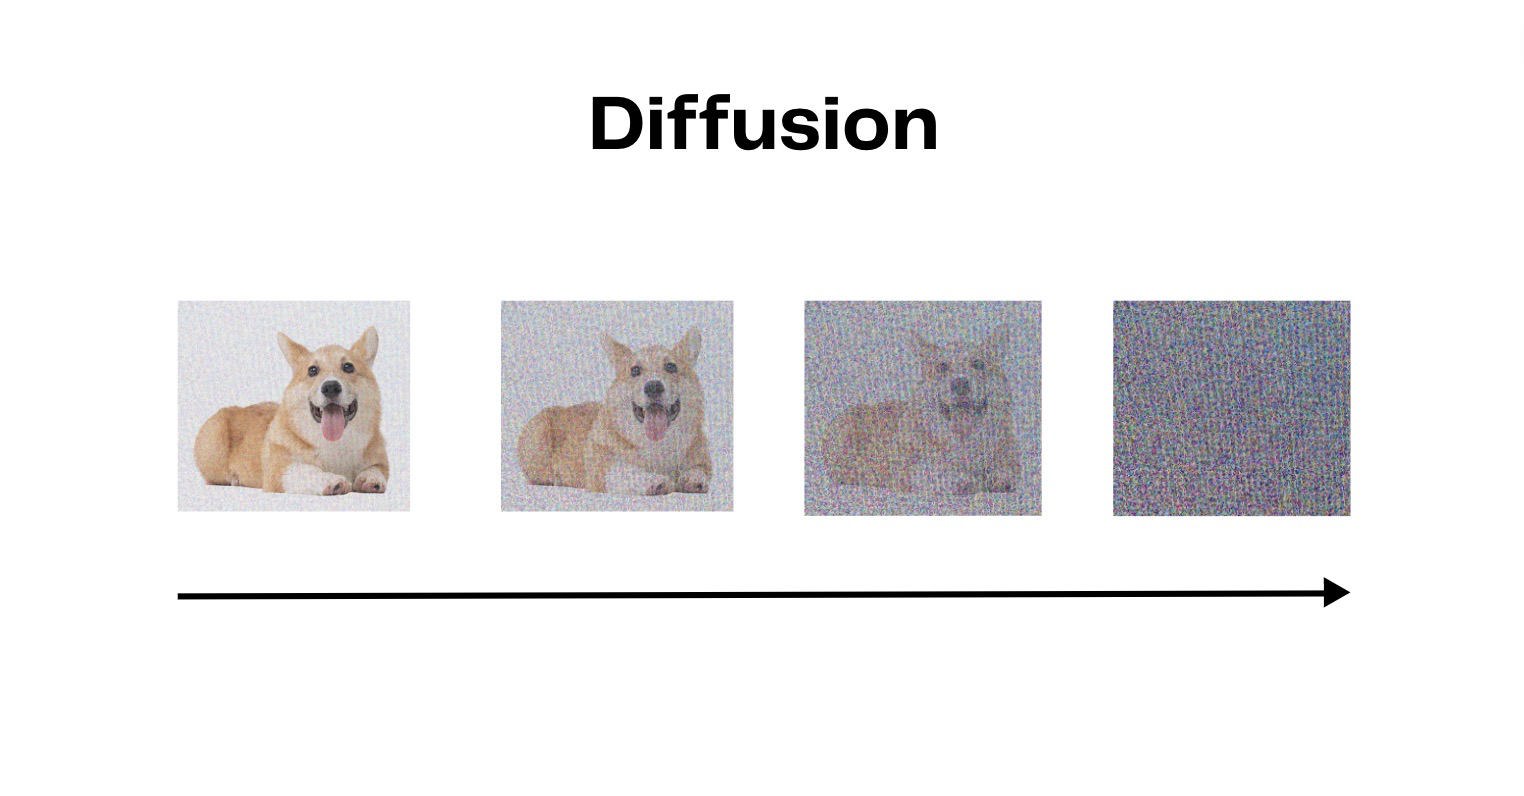 Diagram illustrating the process of diffusion for an image